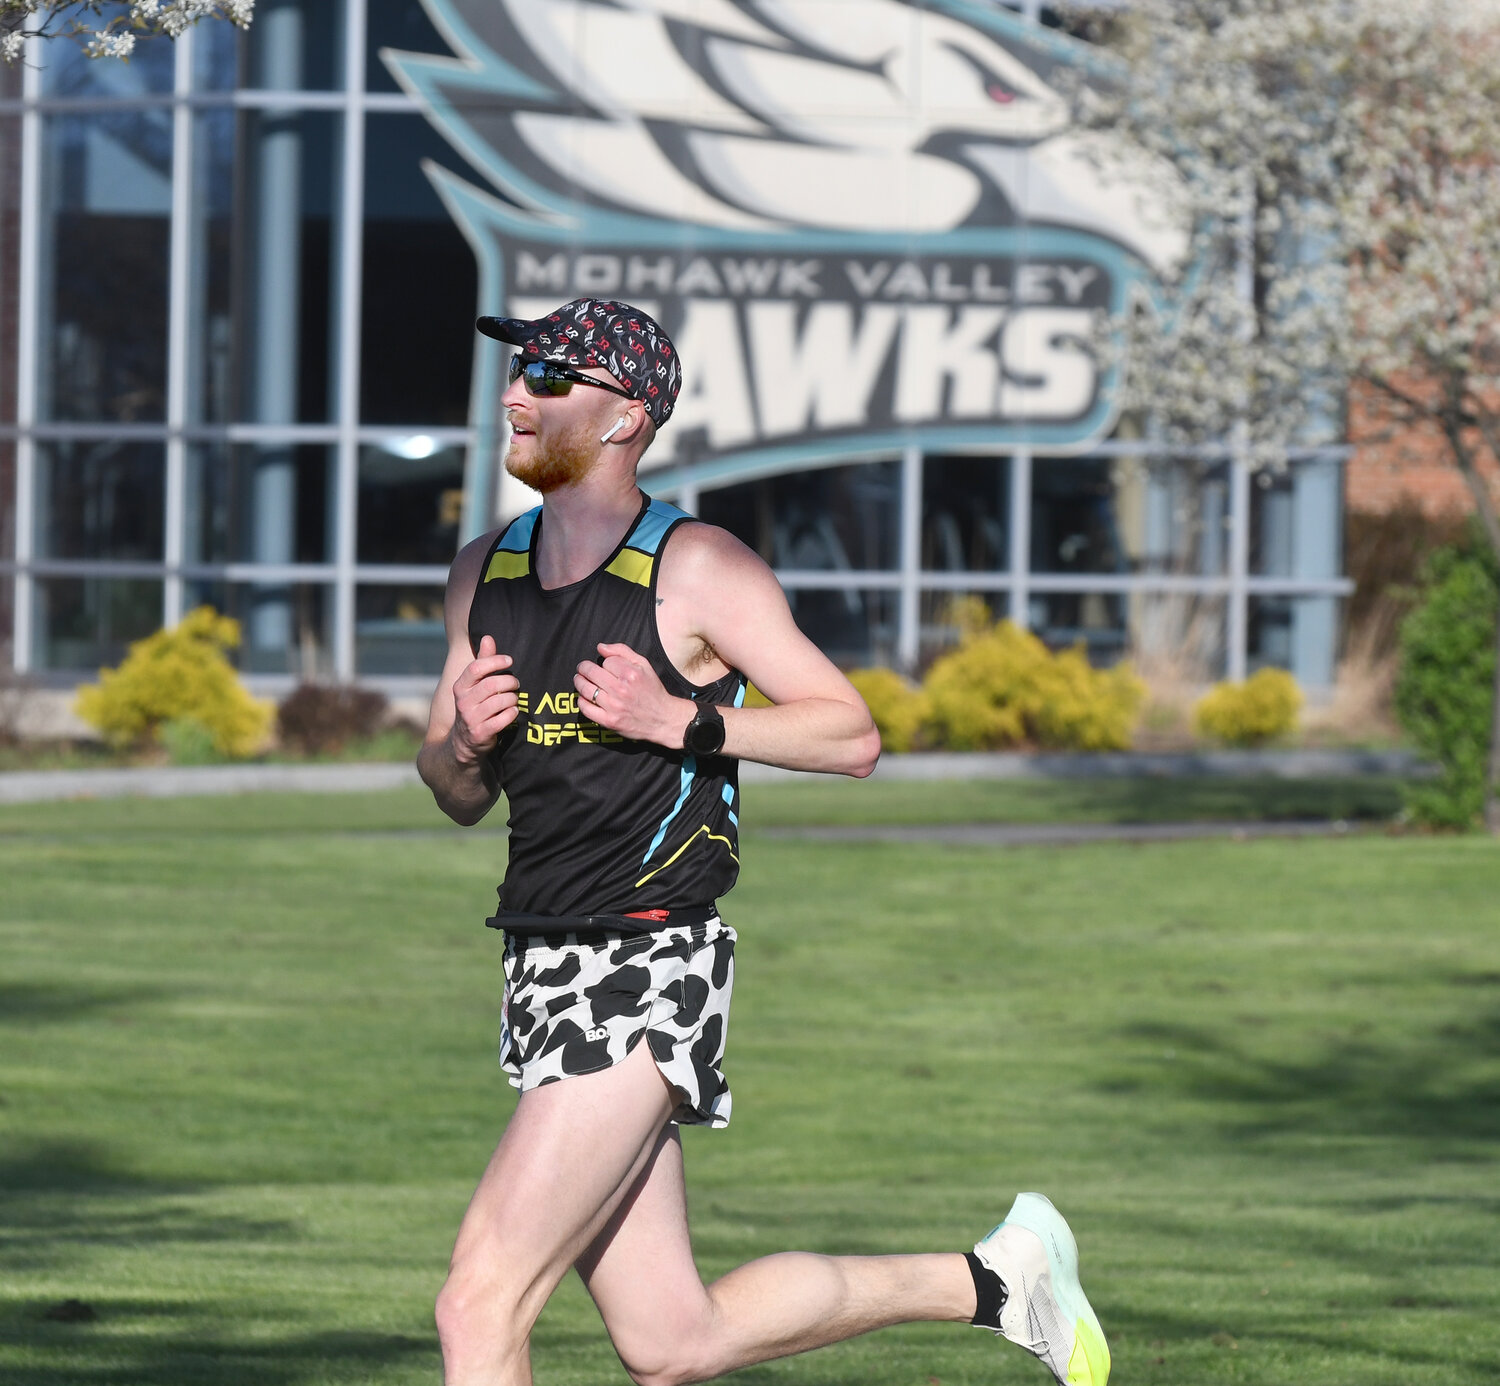 Christopher Edick of New York Mills won the 2023 Theodore “Ted” Moore Run/Walk at Mohawk Valley Community College Thursday. He ran the 5K in 18:38. The race, now in its 26th year on the Utica campus, is presented by the Oneida County STOP-DWI Program.